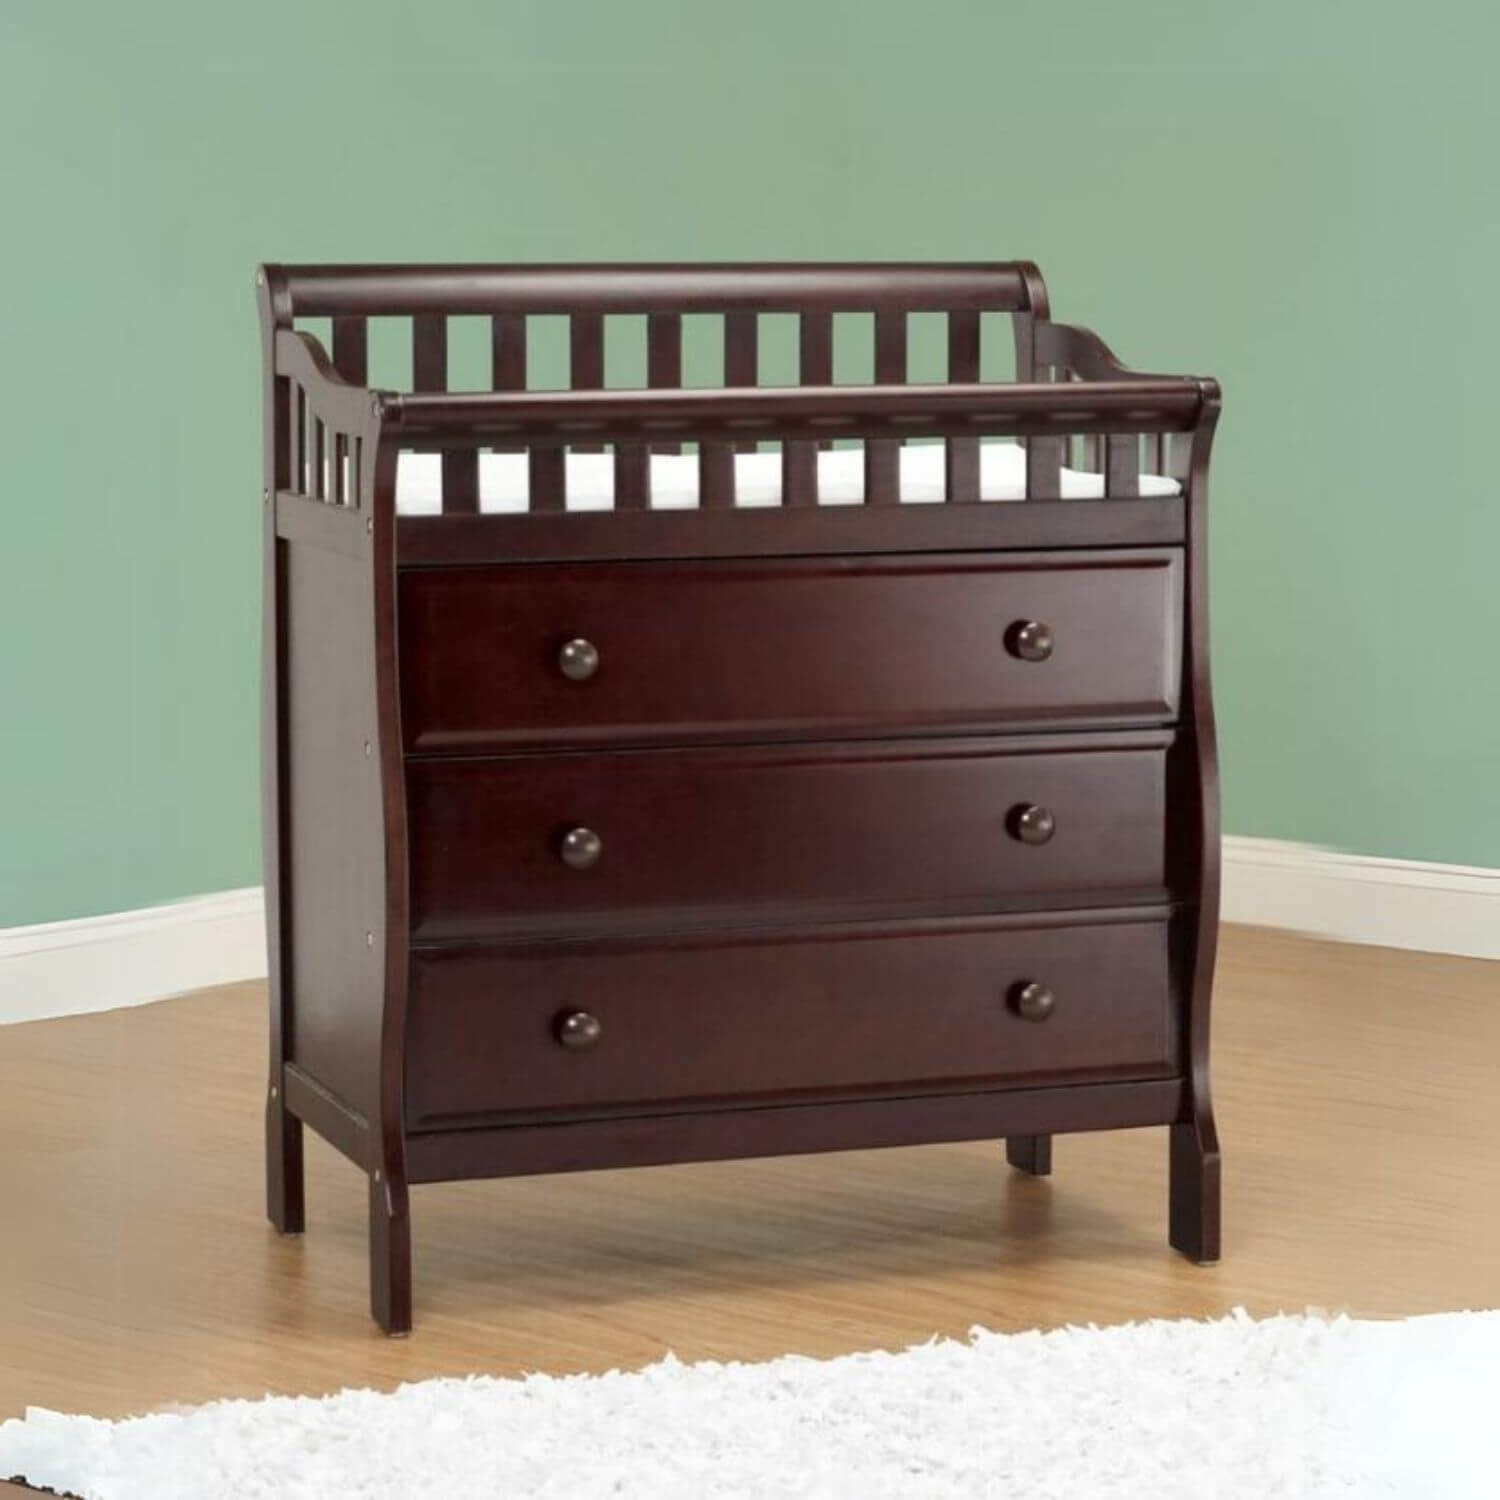 Orbelle Oneman Changing Table Espresso - Lifestyle